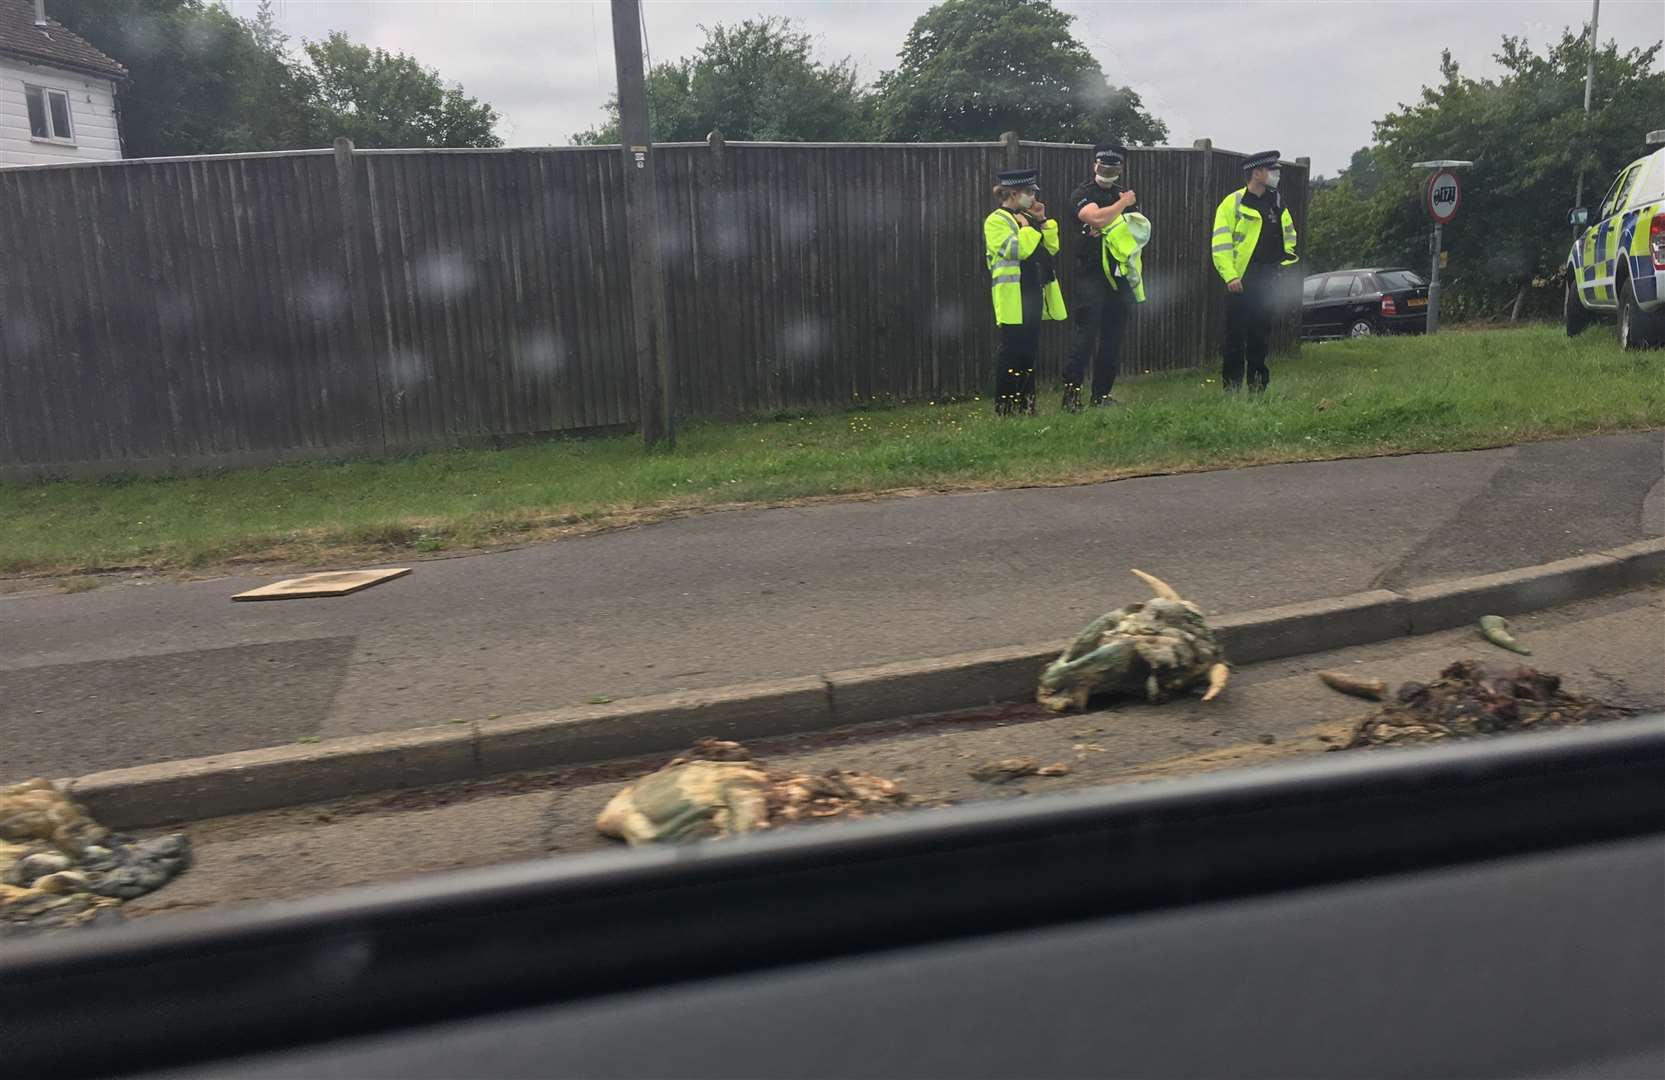 Police have closed off the road after a lorry shed its load. Picture: Harry Higginson